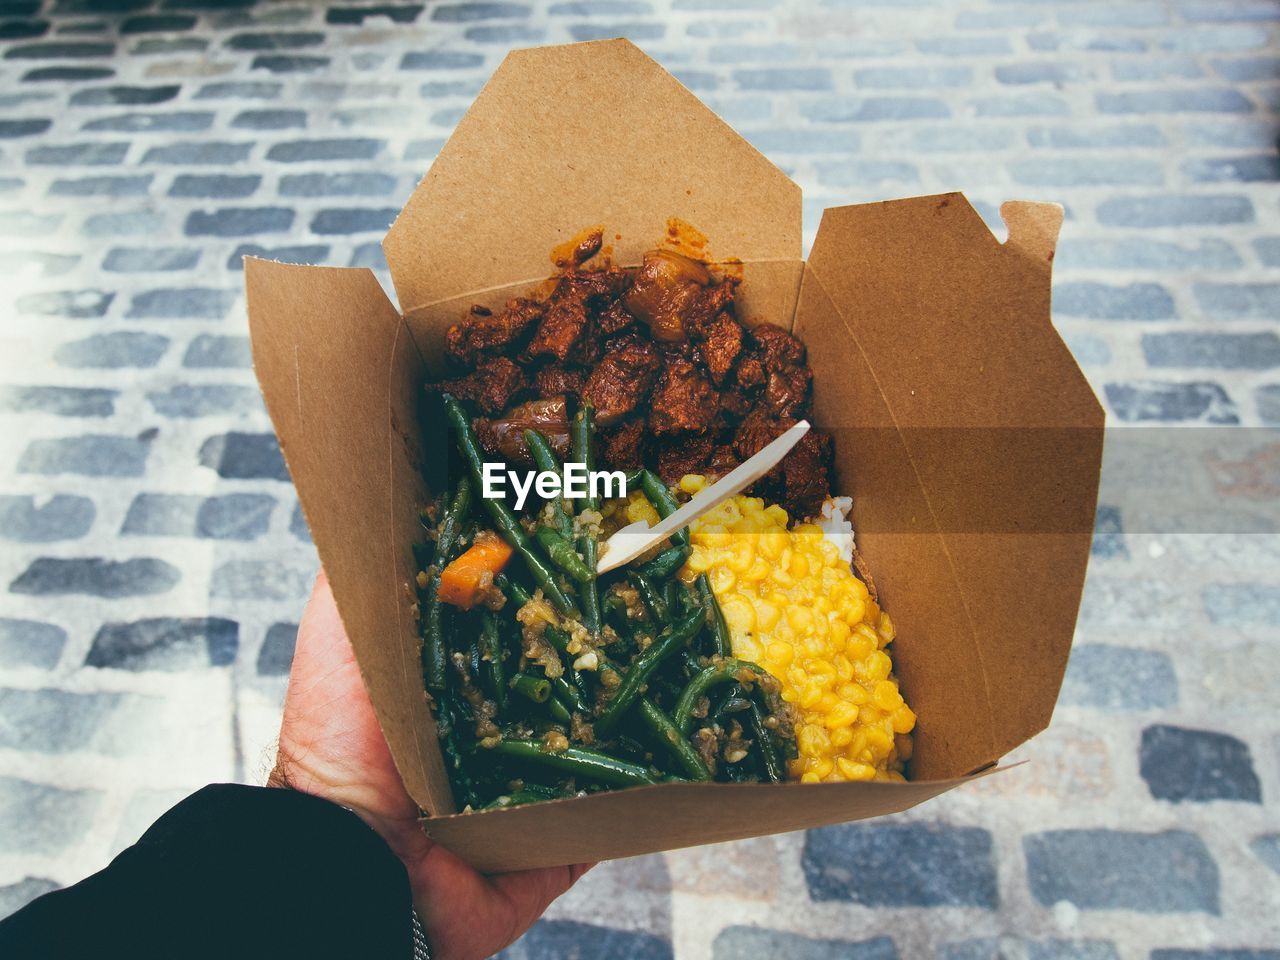 Cropped image of hand holding lunch in box on street